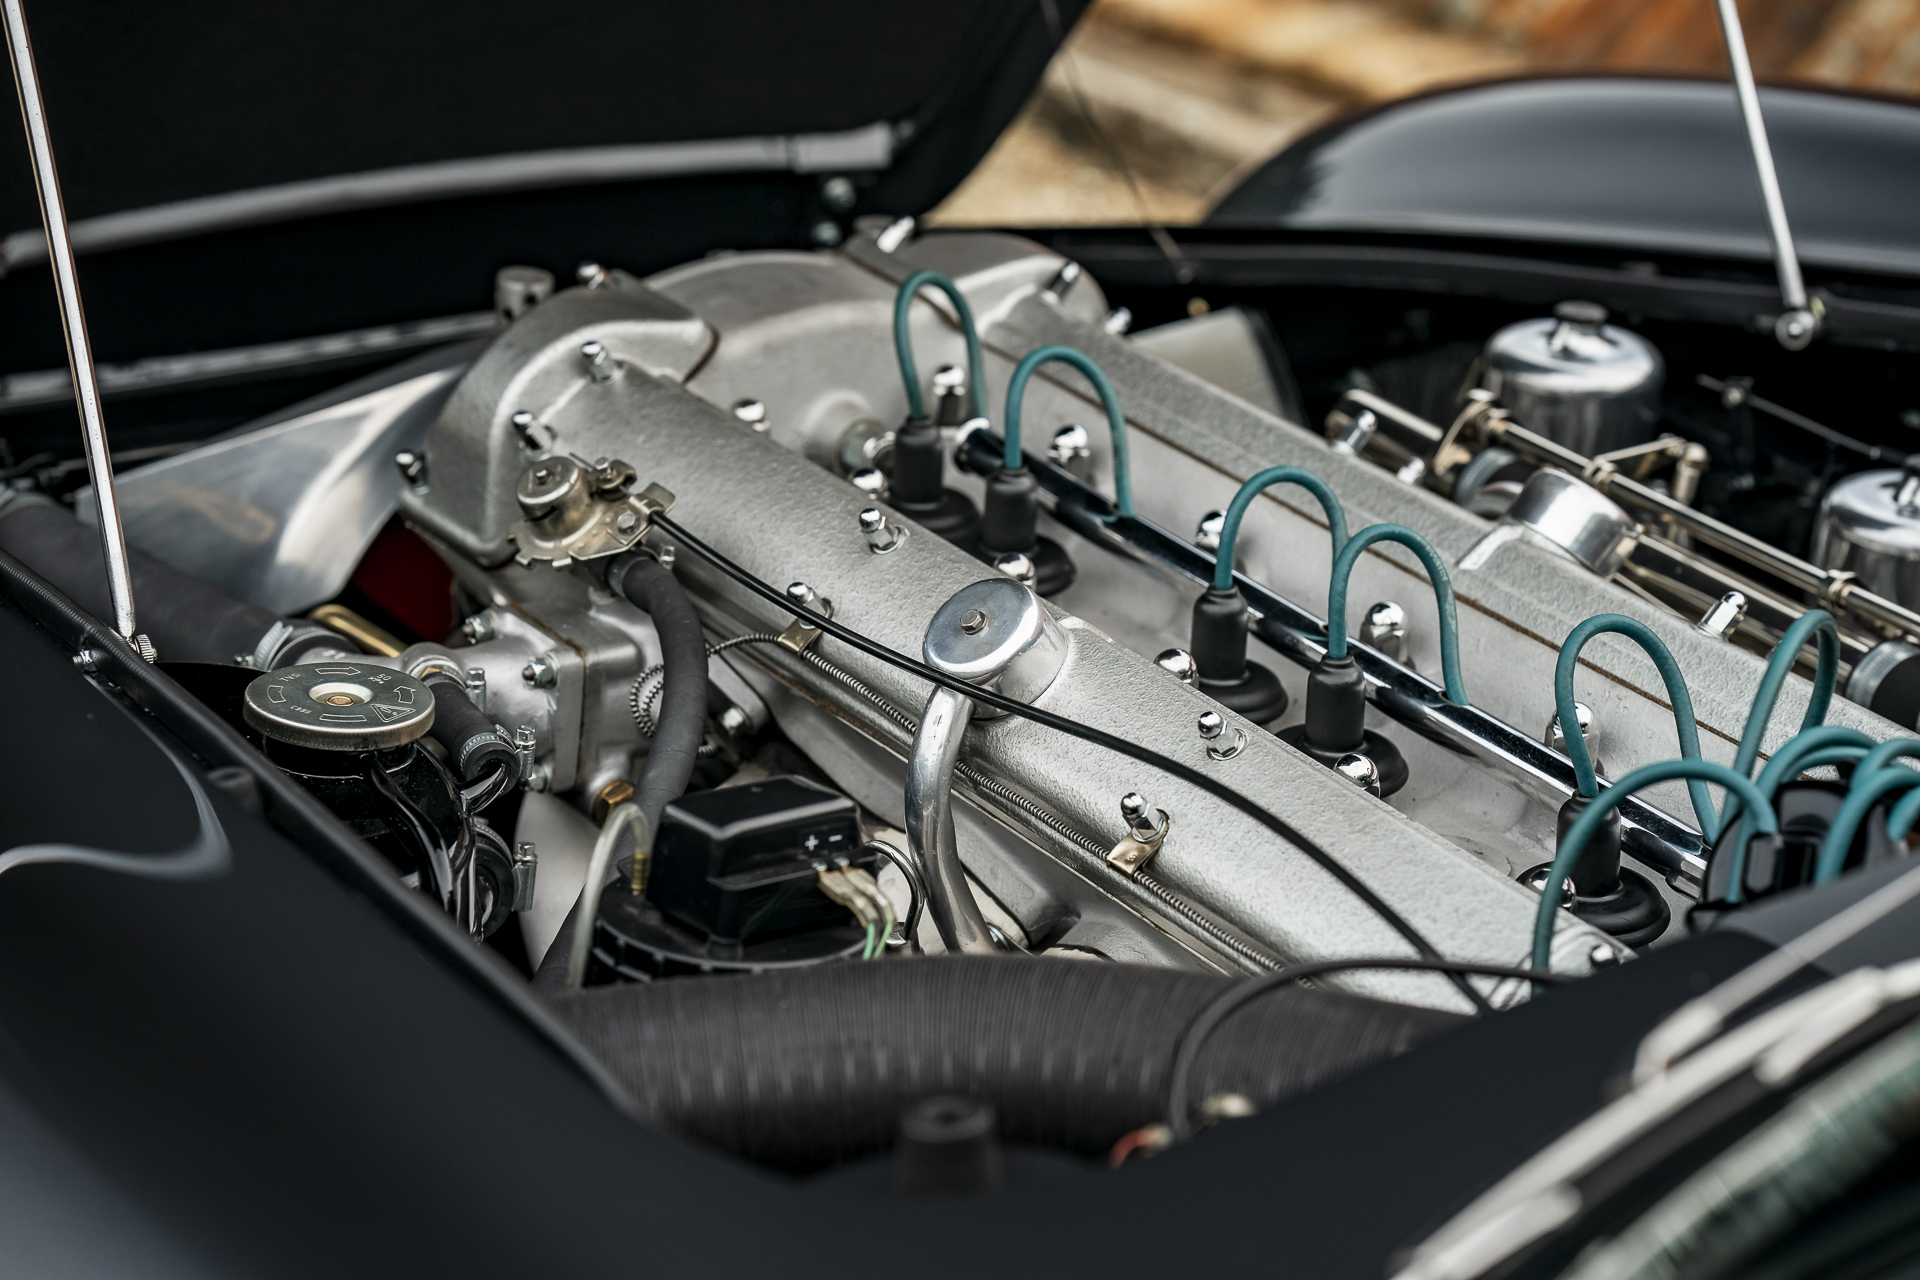 1964 Aston Martin DB5 for sale at The Classic Motor Hub